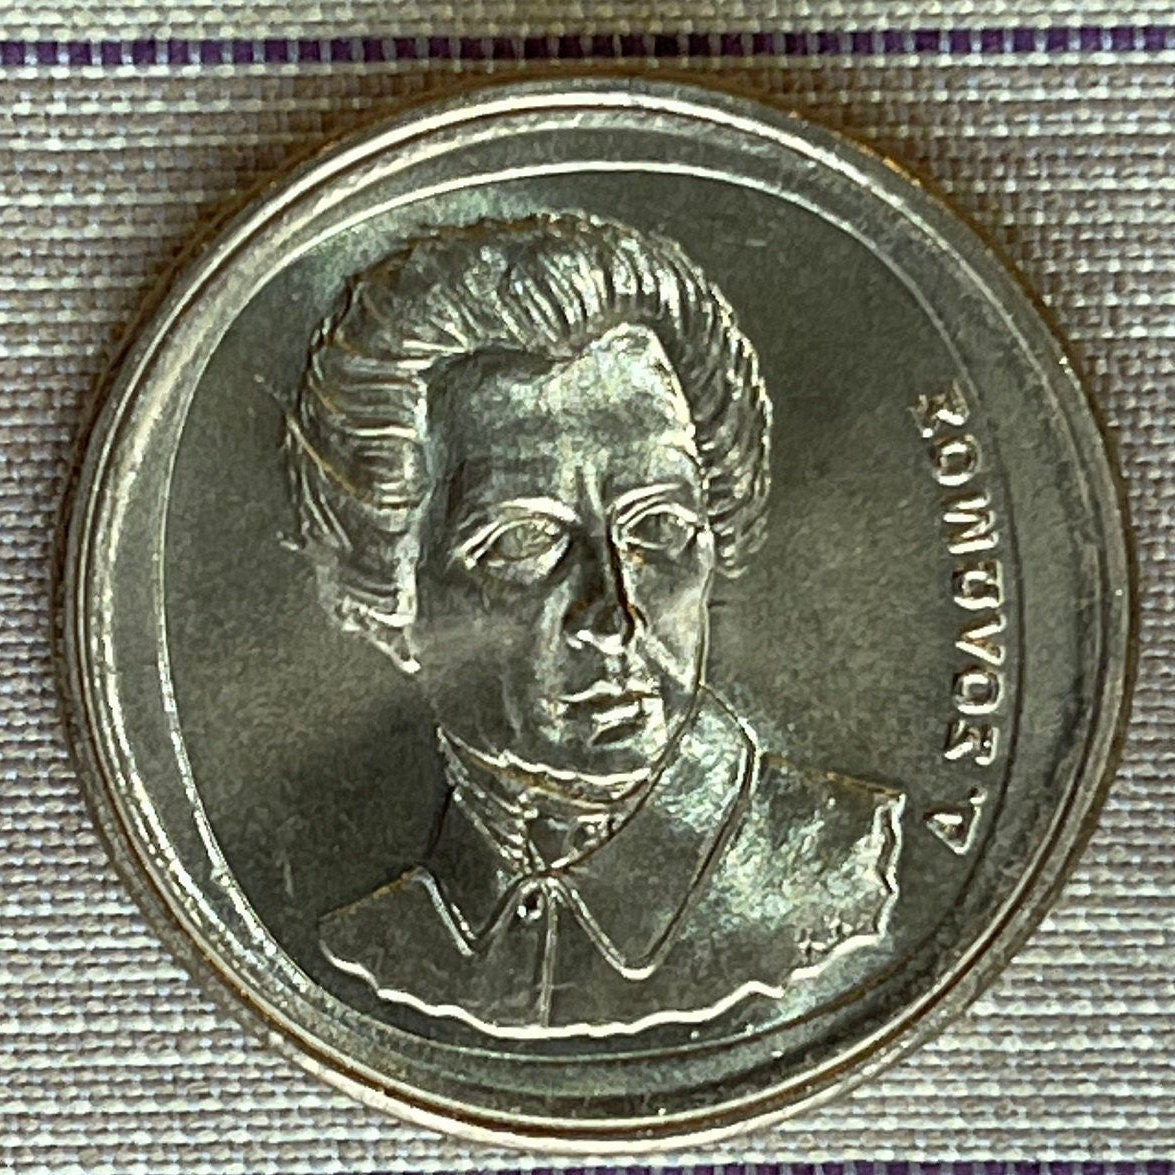 Nationalist Poet Dionysios Solomos "Hymn to Liberty" Poet 20 Drachmai Greece Authentic Coin Money for Jewelry (Anthem) (Greek Independence)